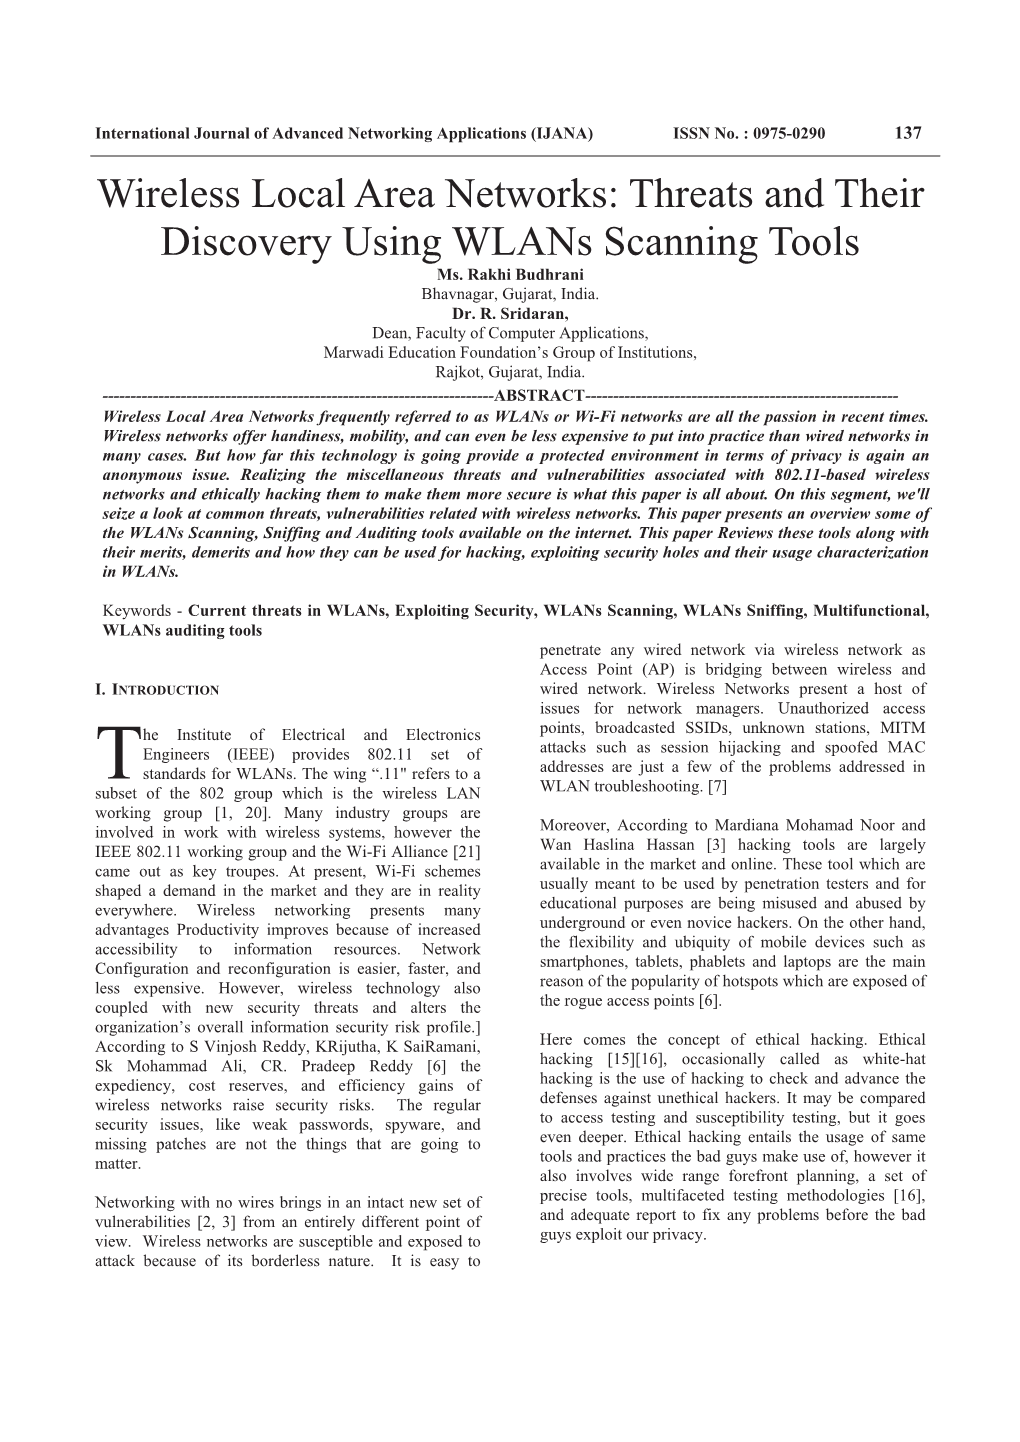 Wireless Local Area Networks: Threats and Their Discovery Using Wlans Scanning Tools Ms